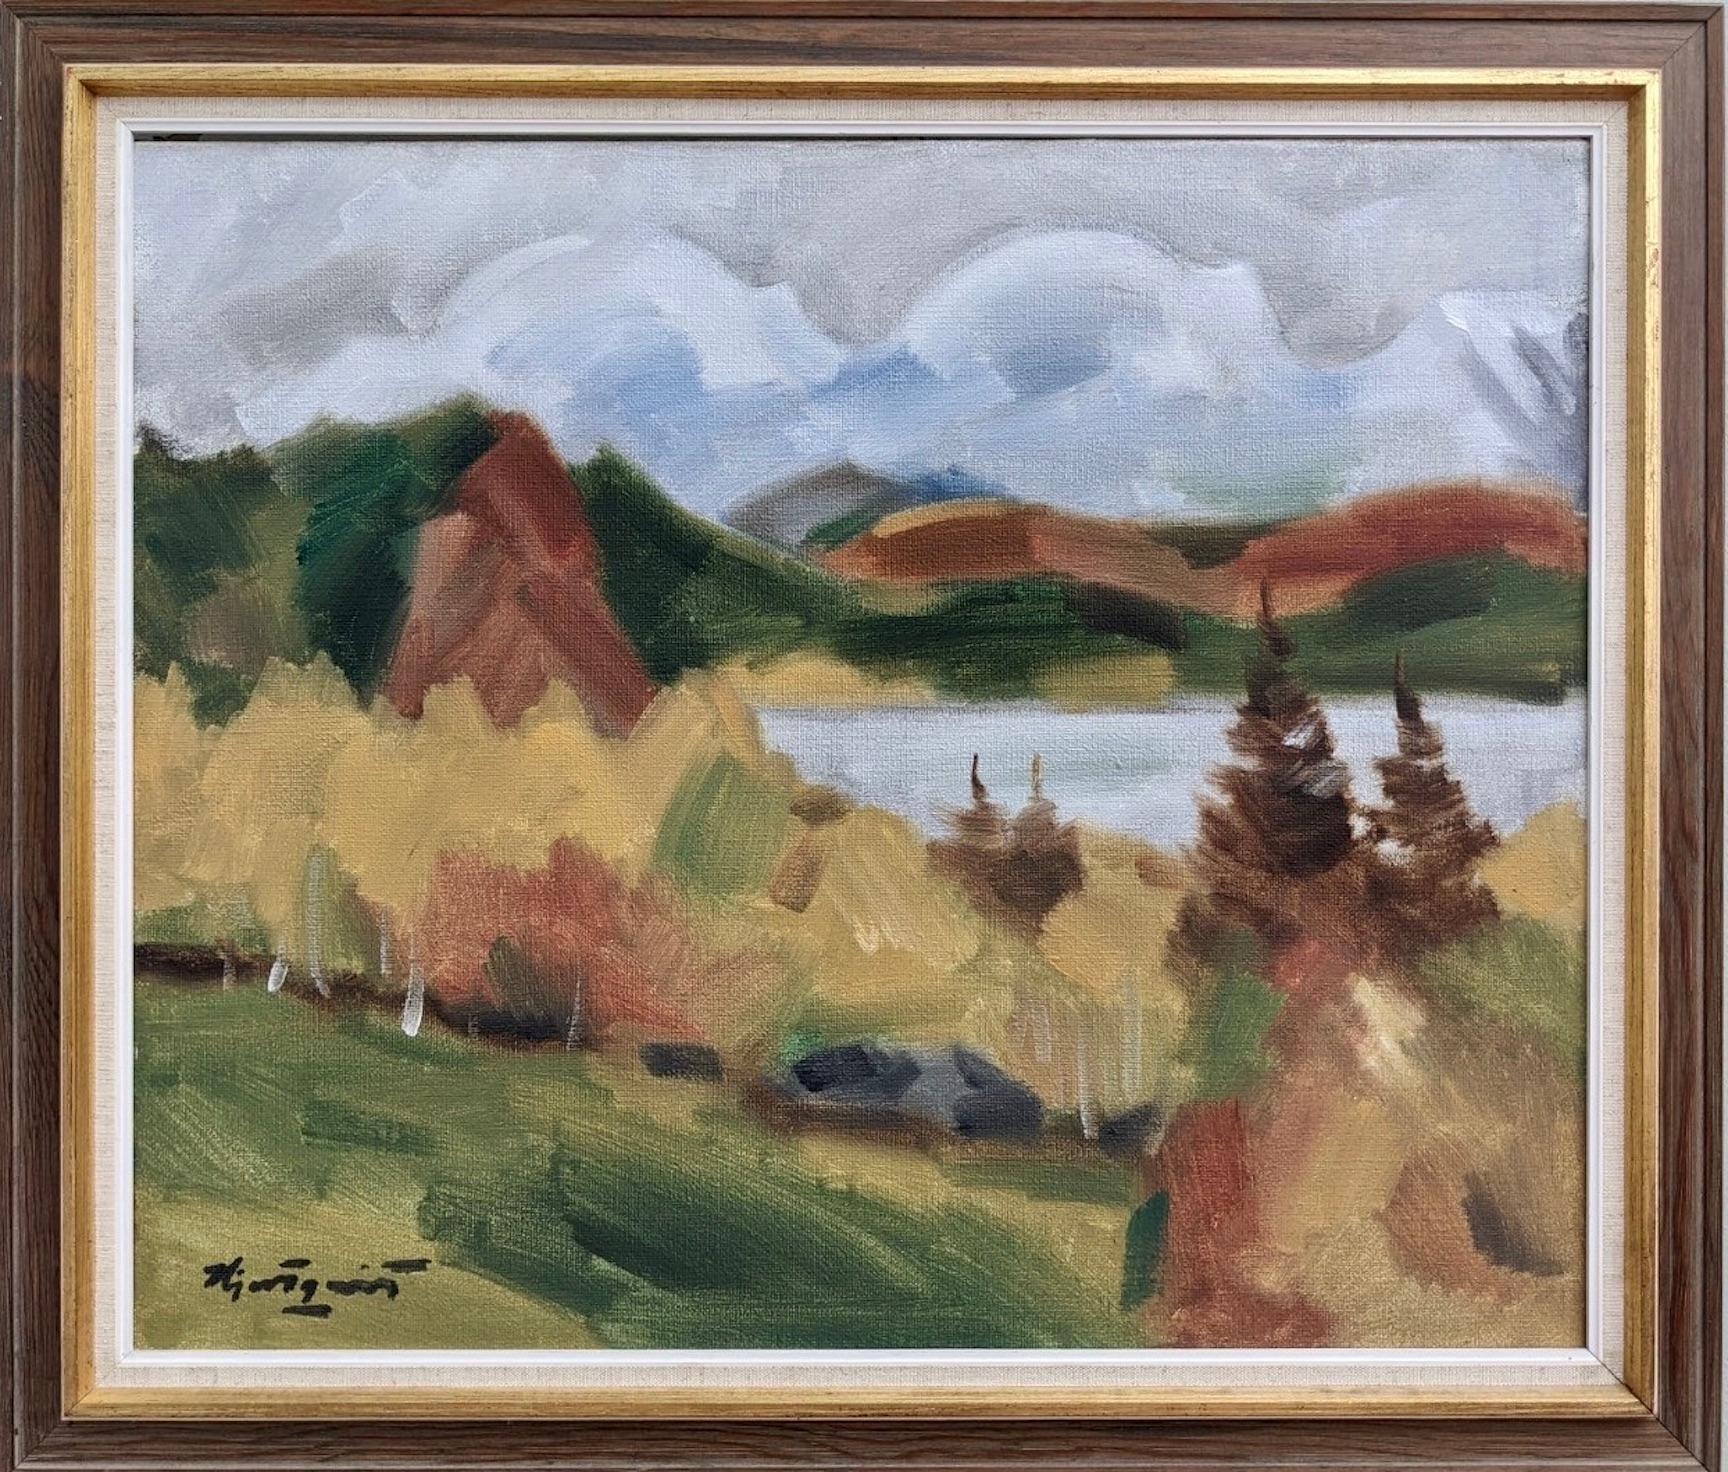 Unknown Landscape Painting - Vintage Expressionist Framed Landscape Oil Painting - Autumn View